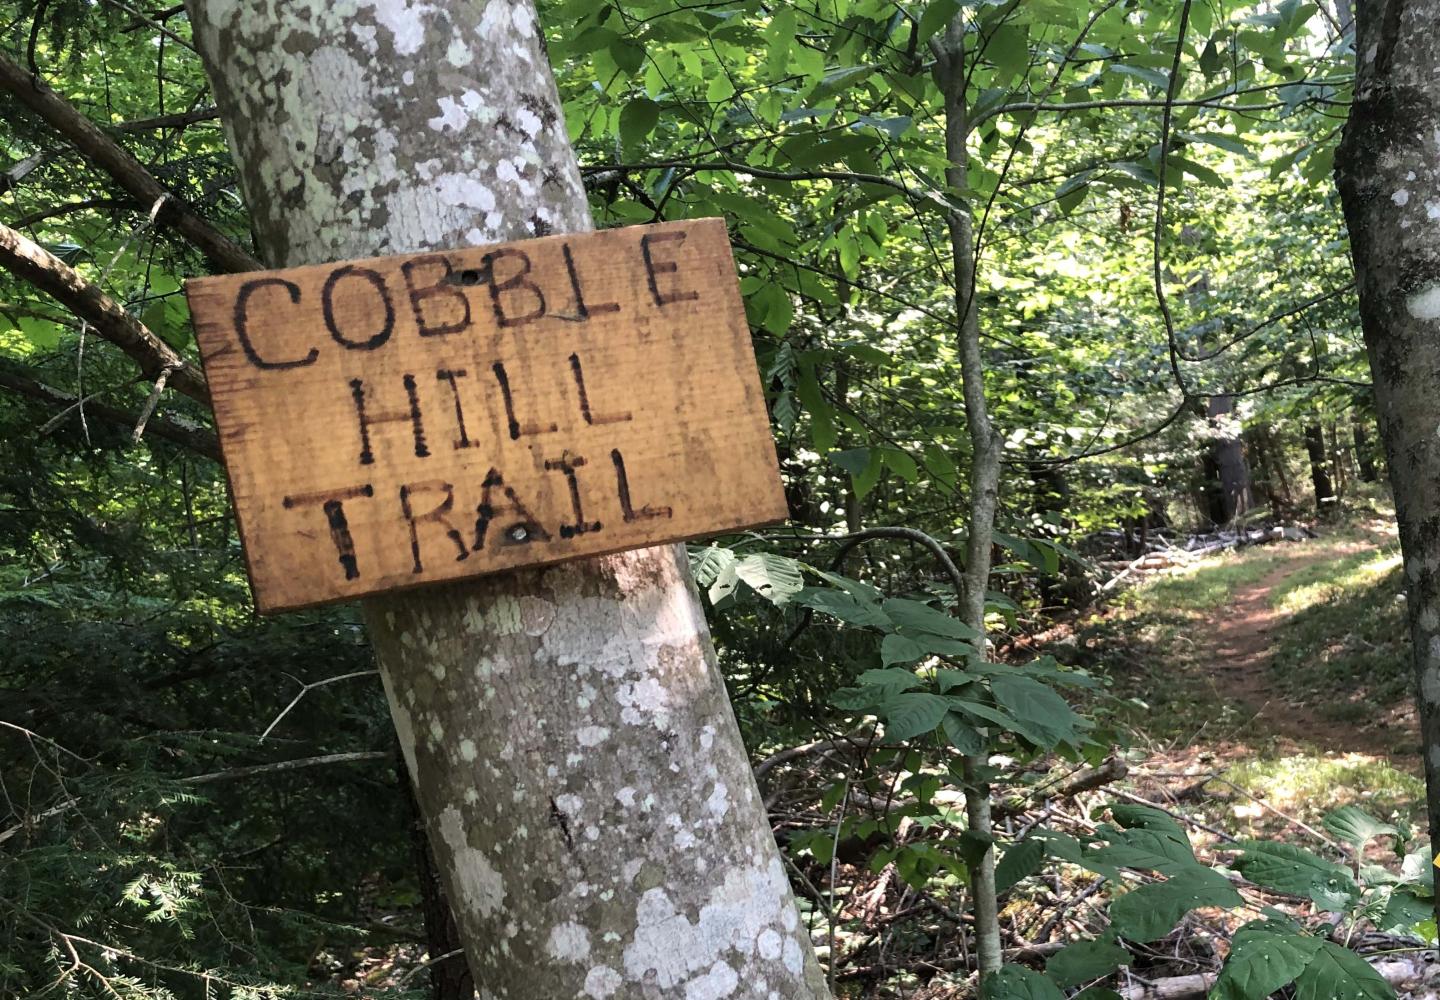 The intermediate Cobble Hill Trail is part of a nearly two-mile loop in the bike-trail network. 